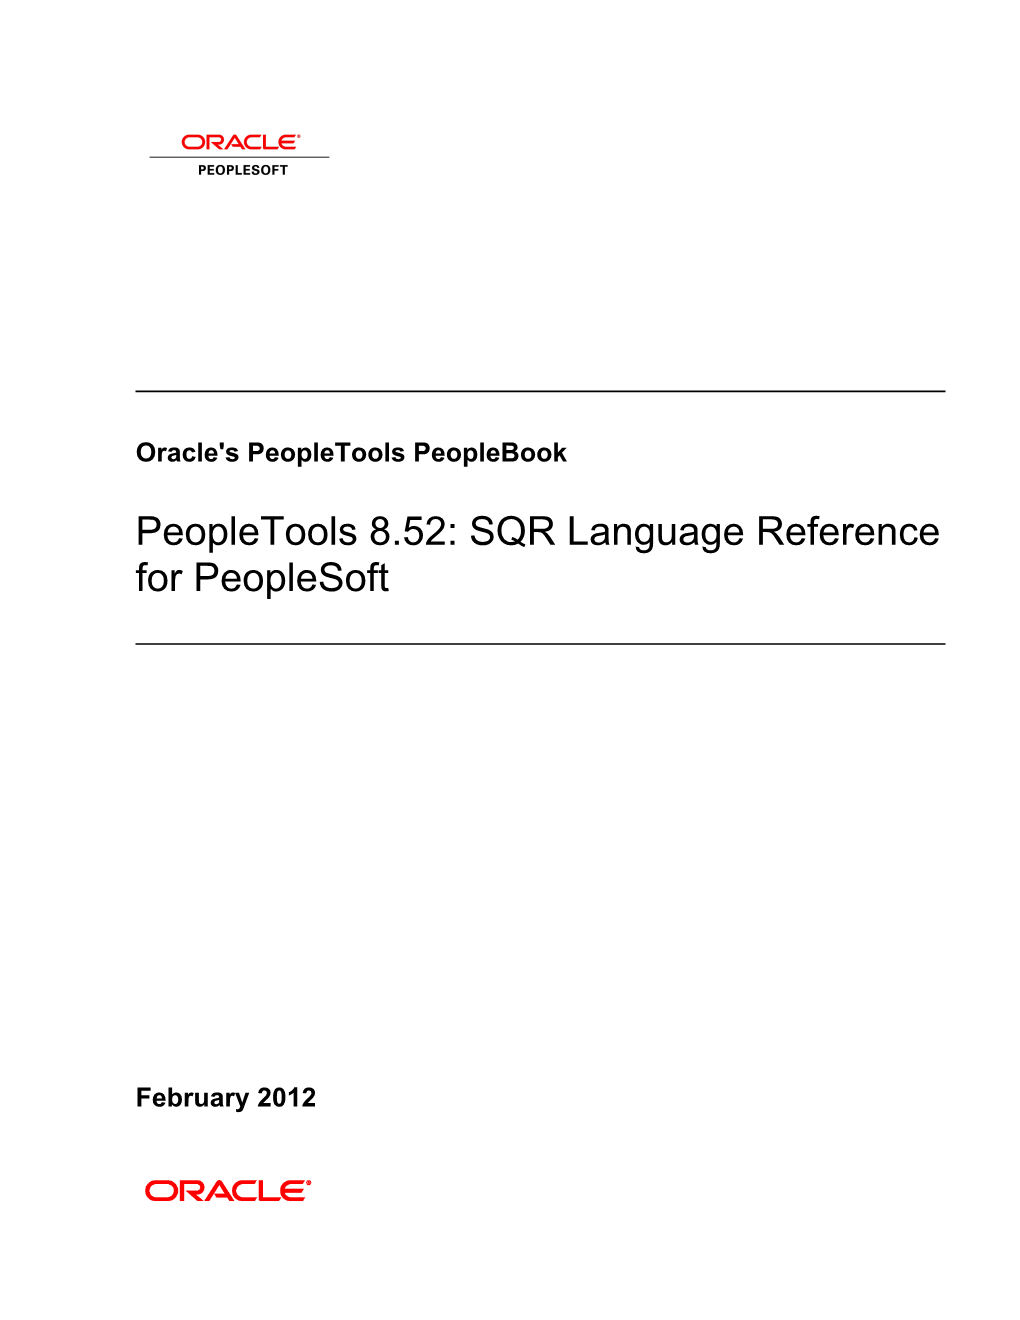 Peopletools 8.52: SQR Language Reference for Peoplesoft